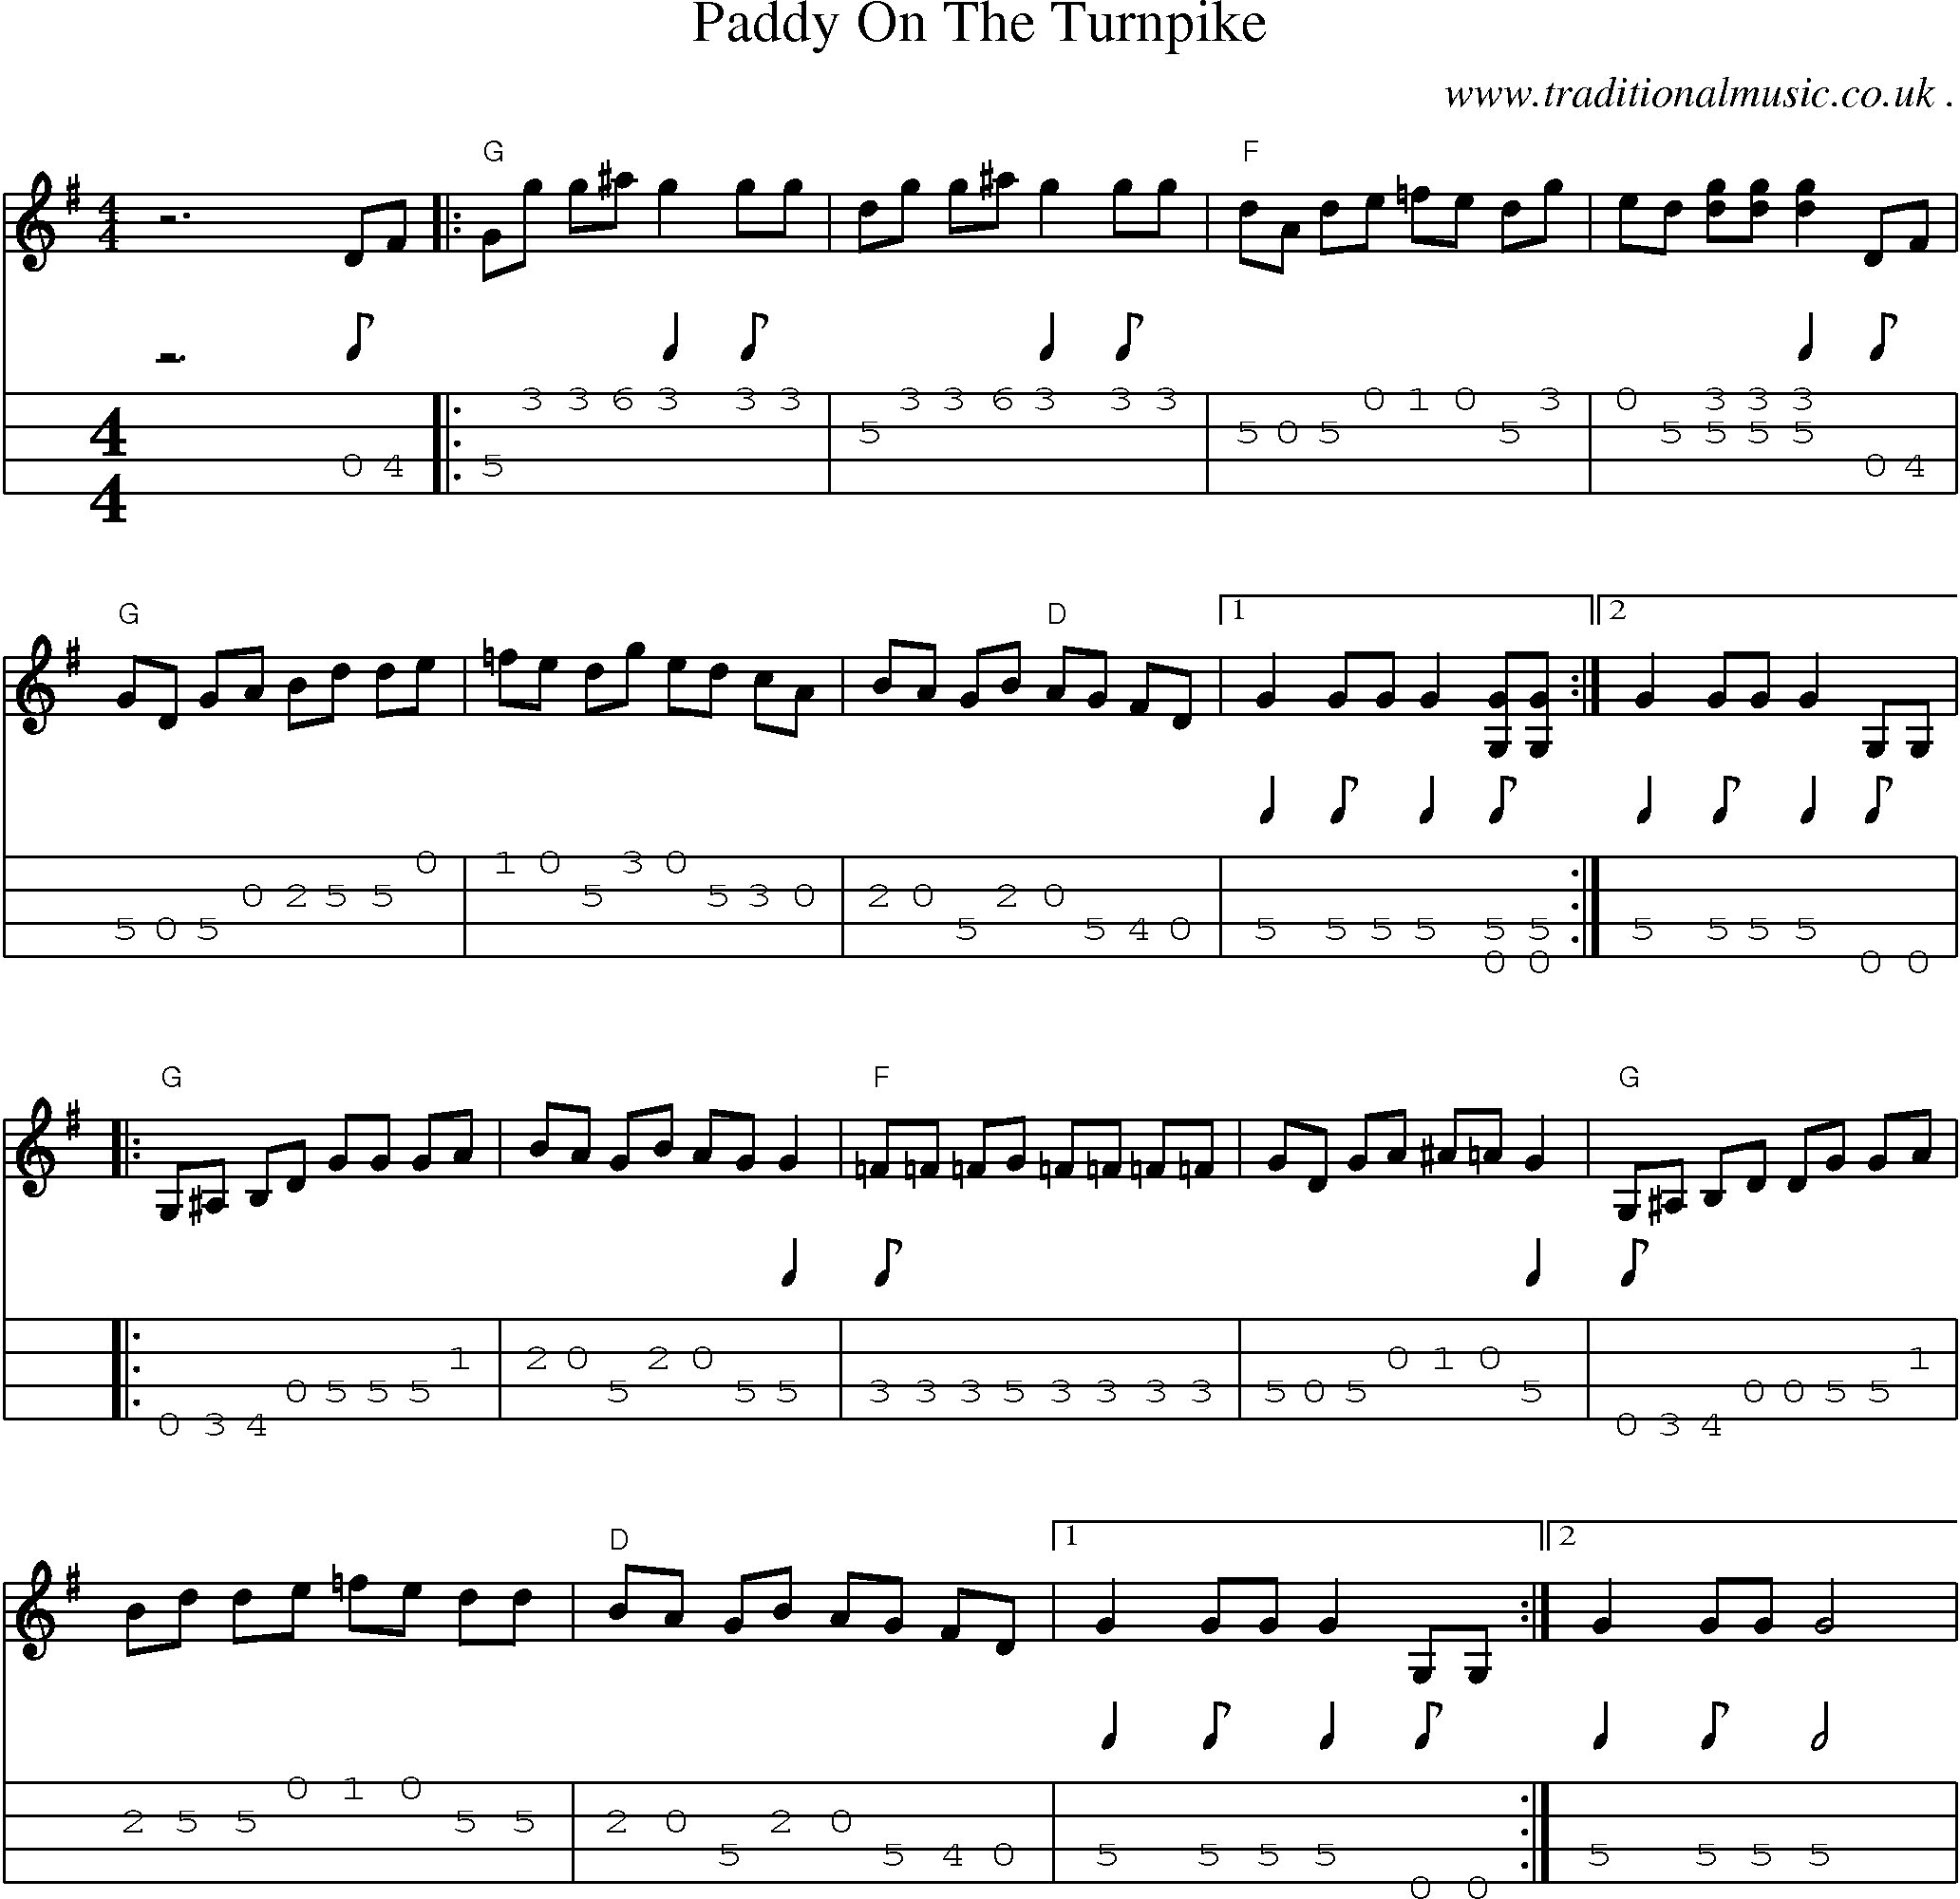 Music Score and Guitar Tabs for Paddy On The Turnpike